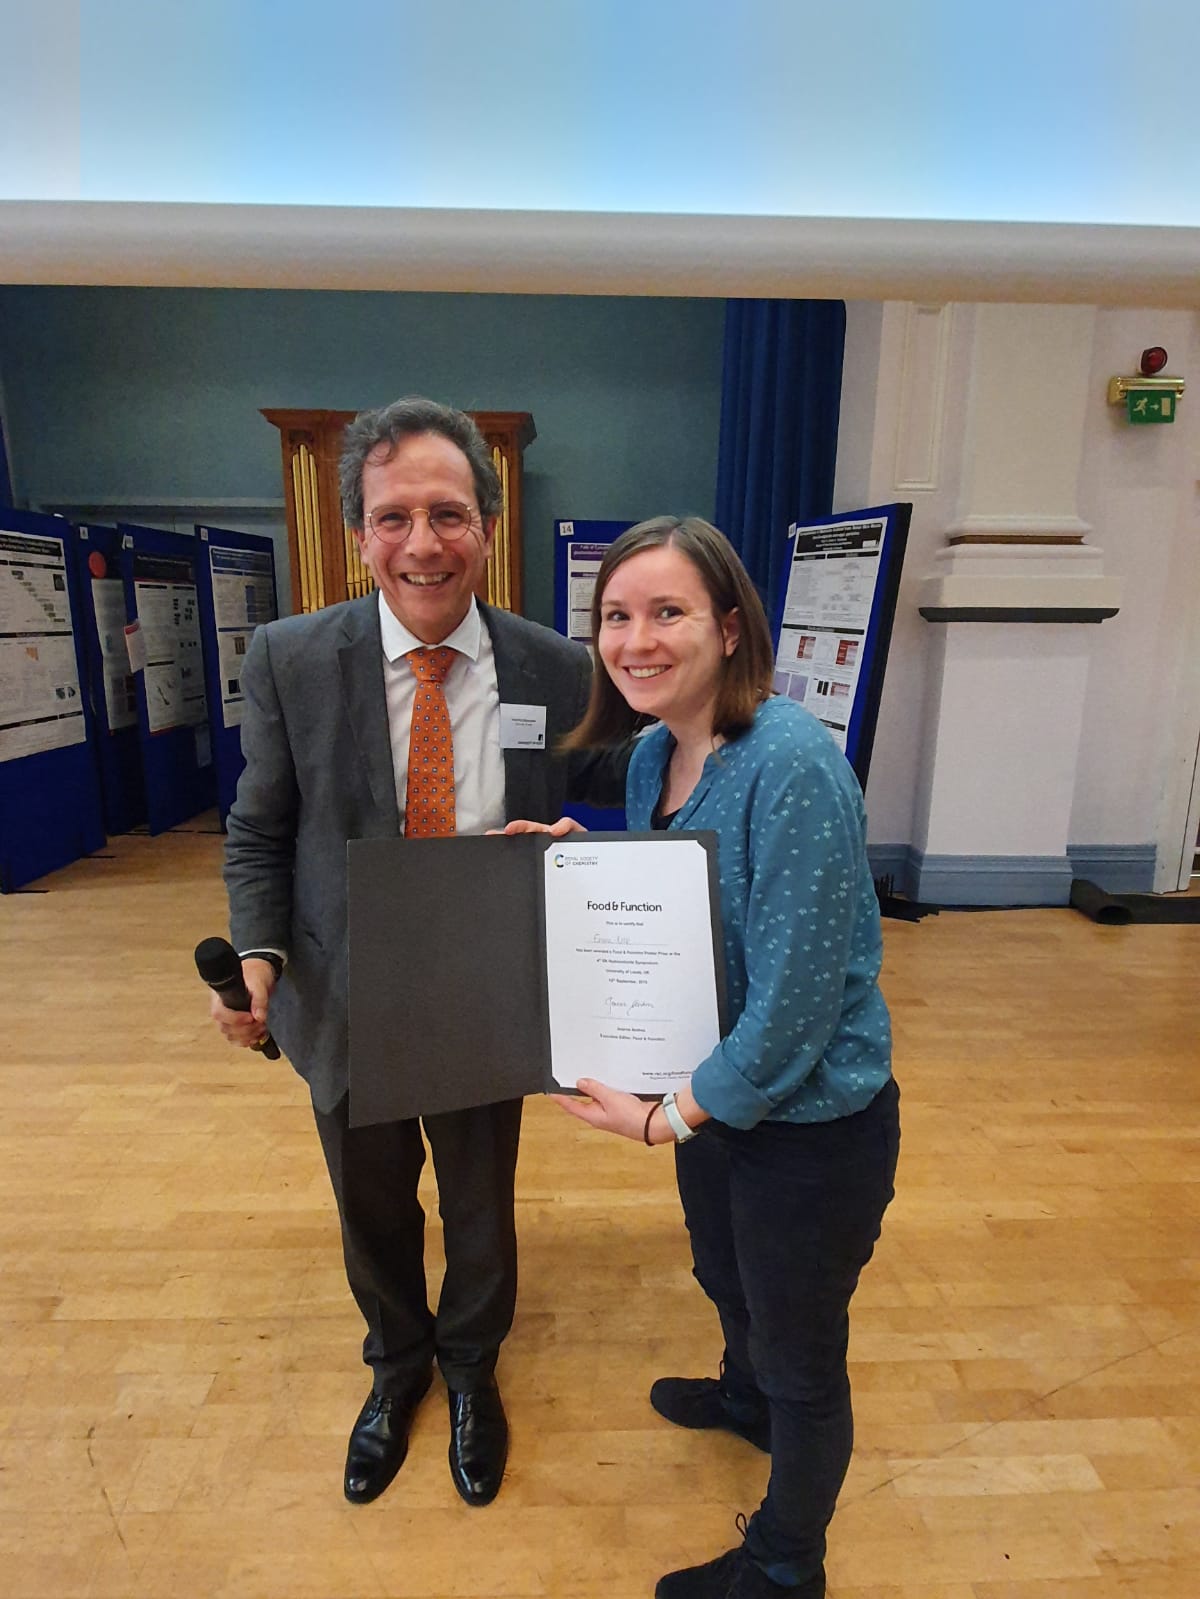 Emma Krop wins the BEST Poster Prize at the 4th UK Hydrocolloids Symposium – From Food to Bioprocessing